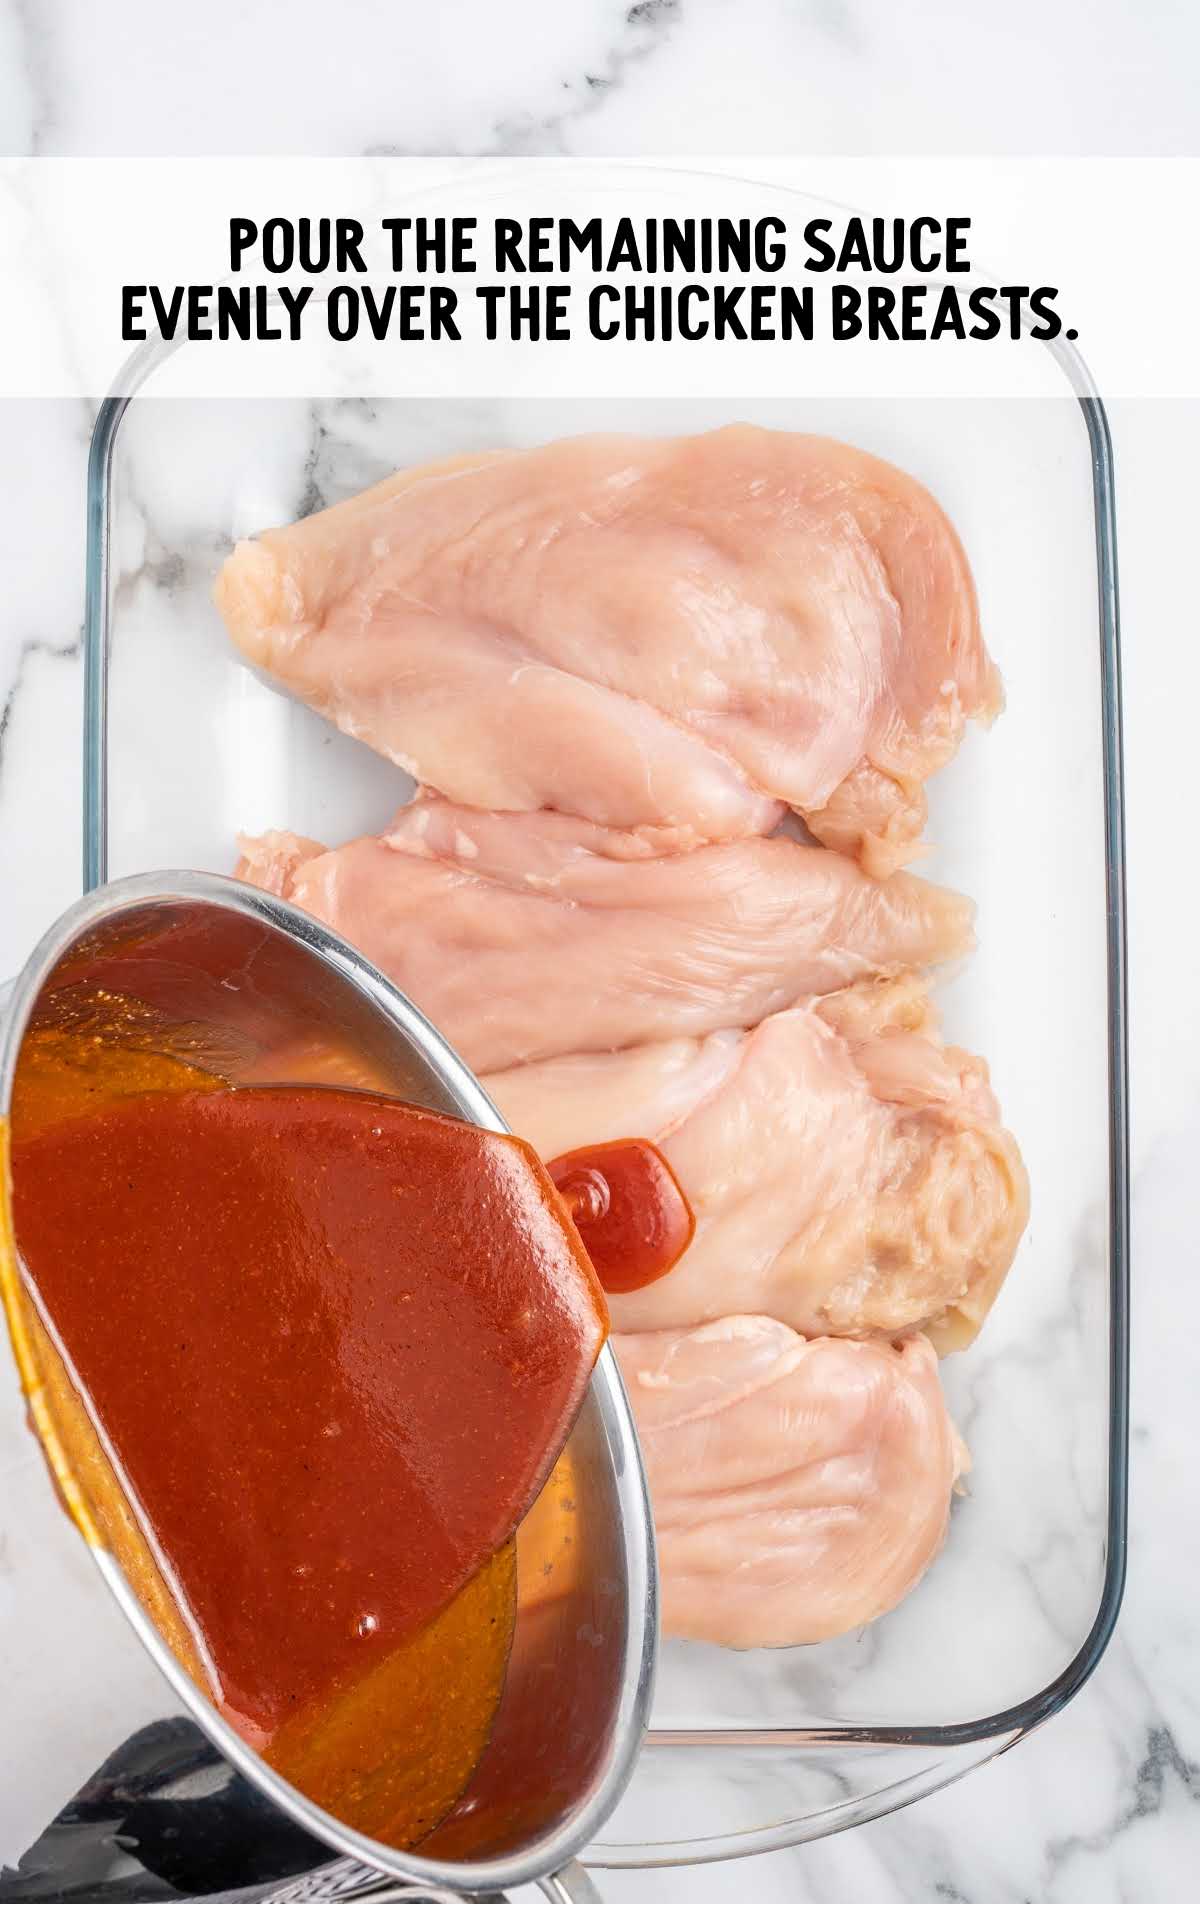 sauce poured over the chicken